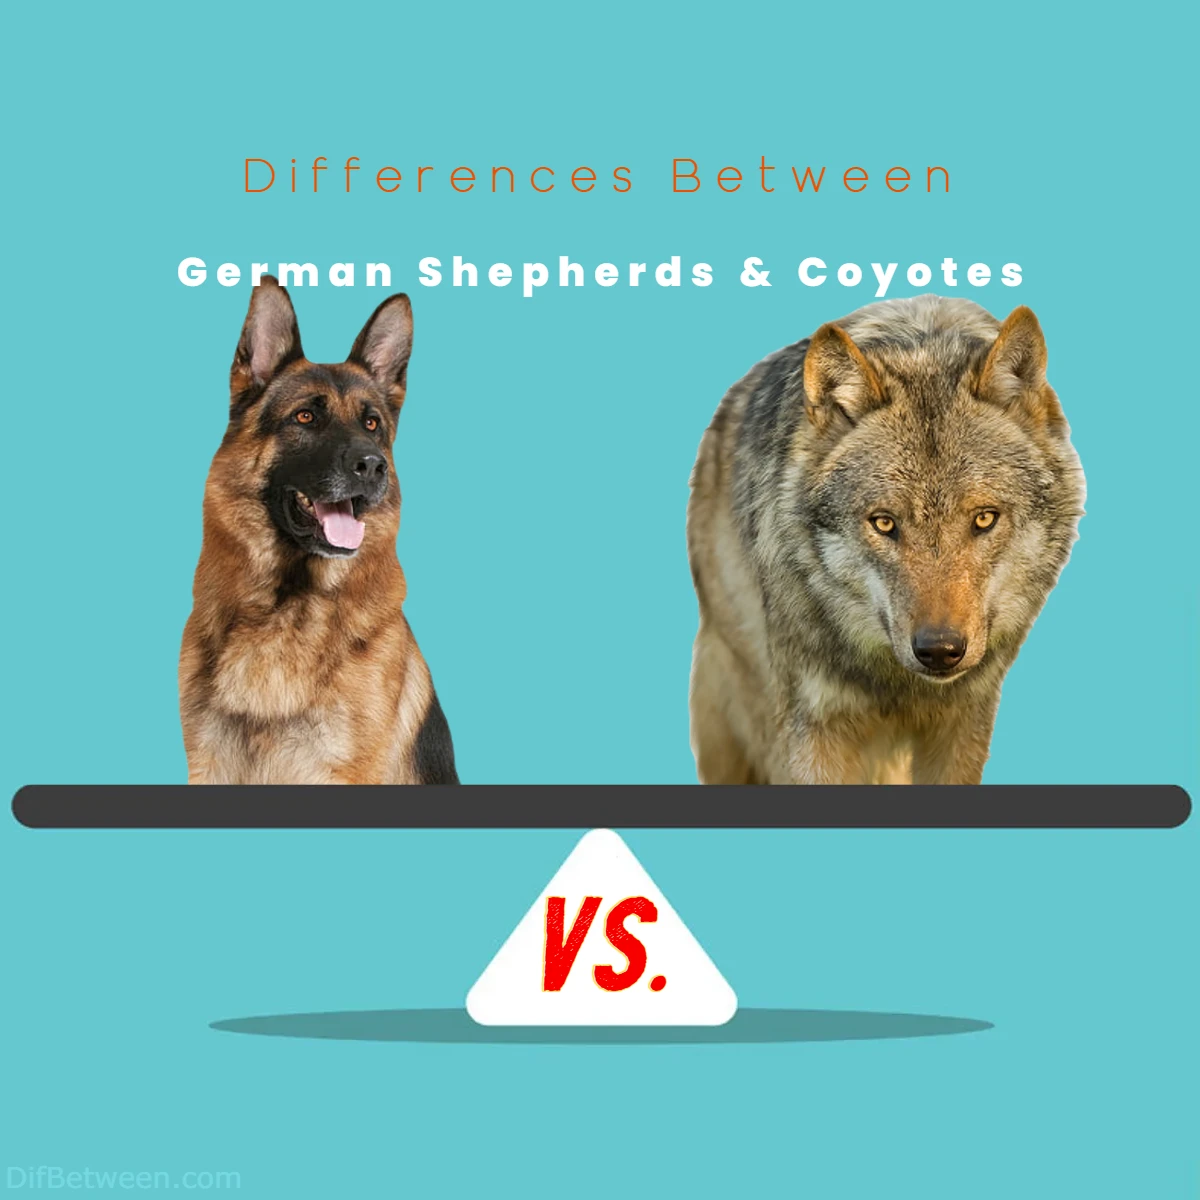 Difference Between Coyotes and German Shepherds